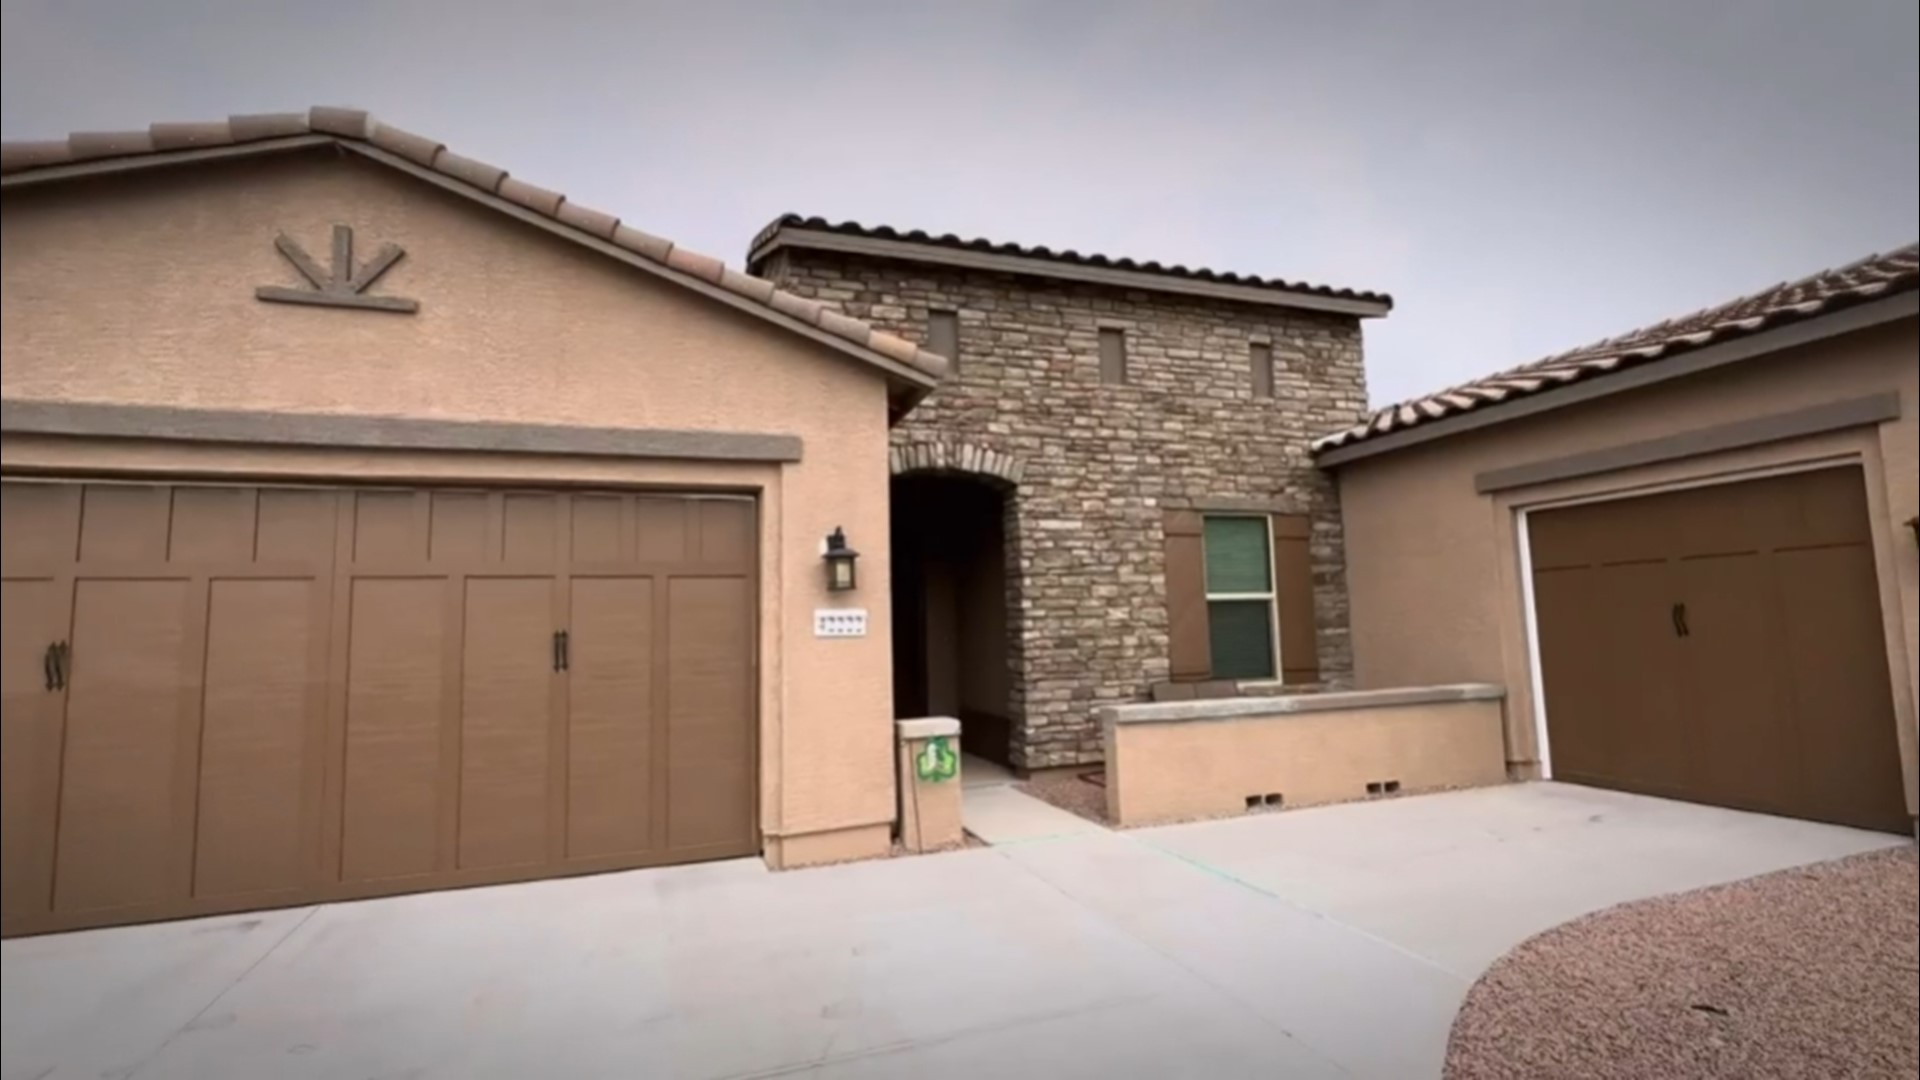 With home building booming in Arizona, many new homeowners are beginning to feel like they are living in fixer-uppers. Our I-Team takes a deeper dive.